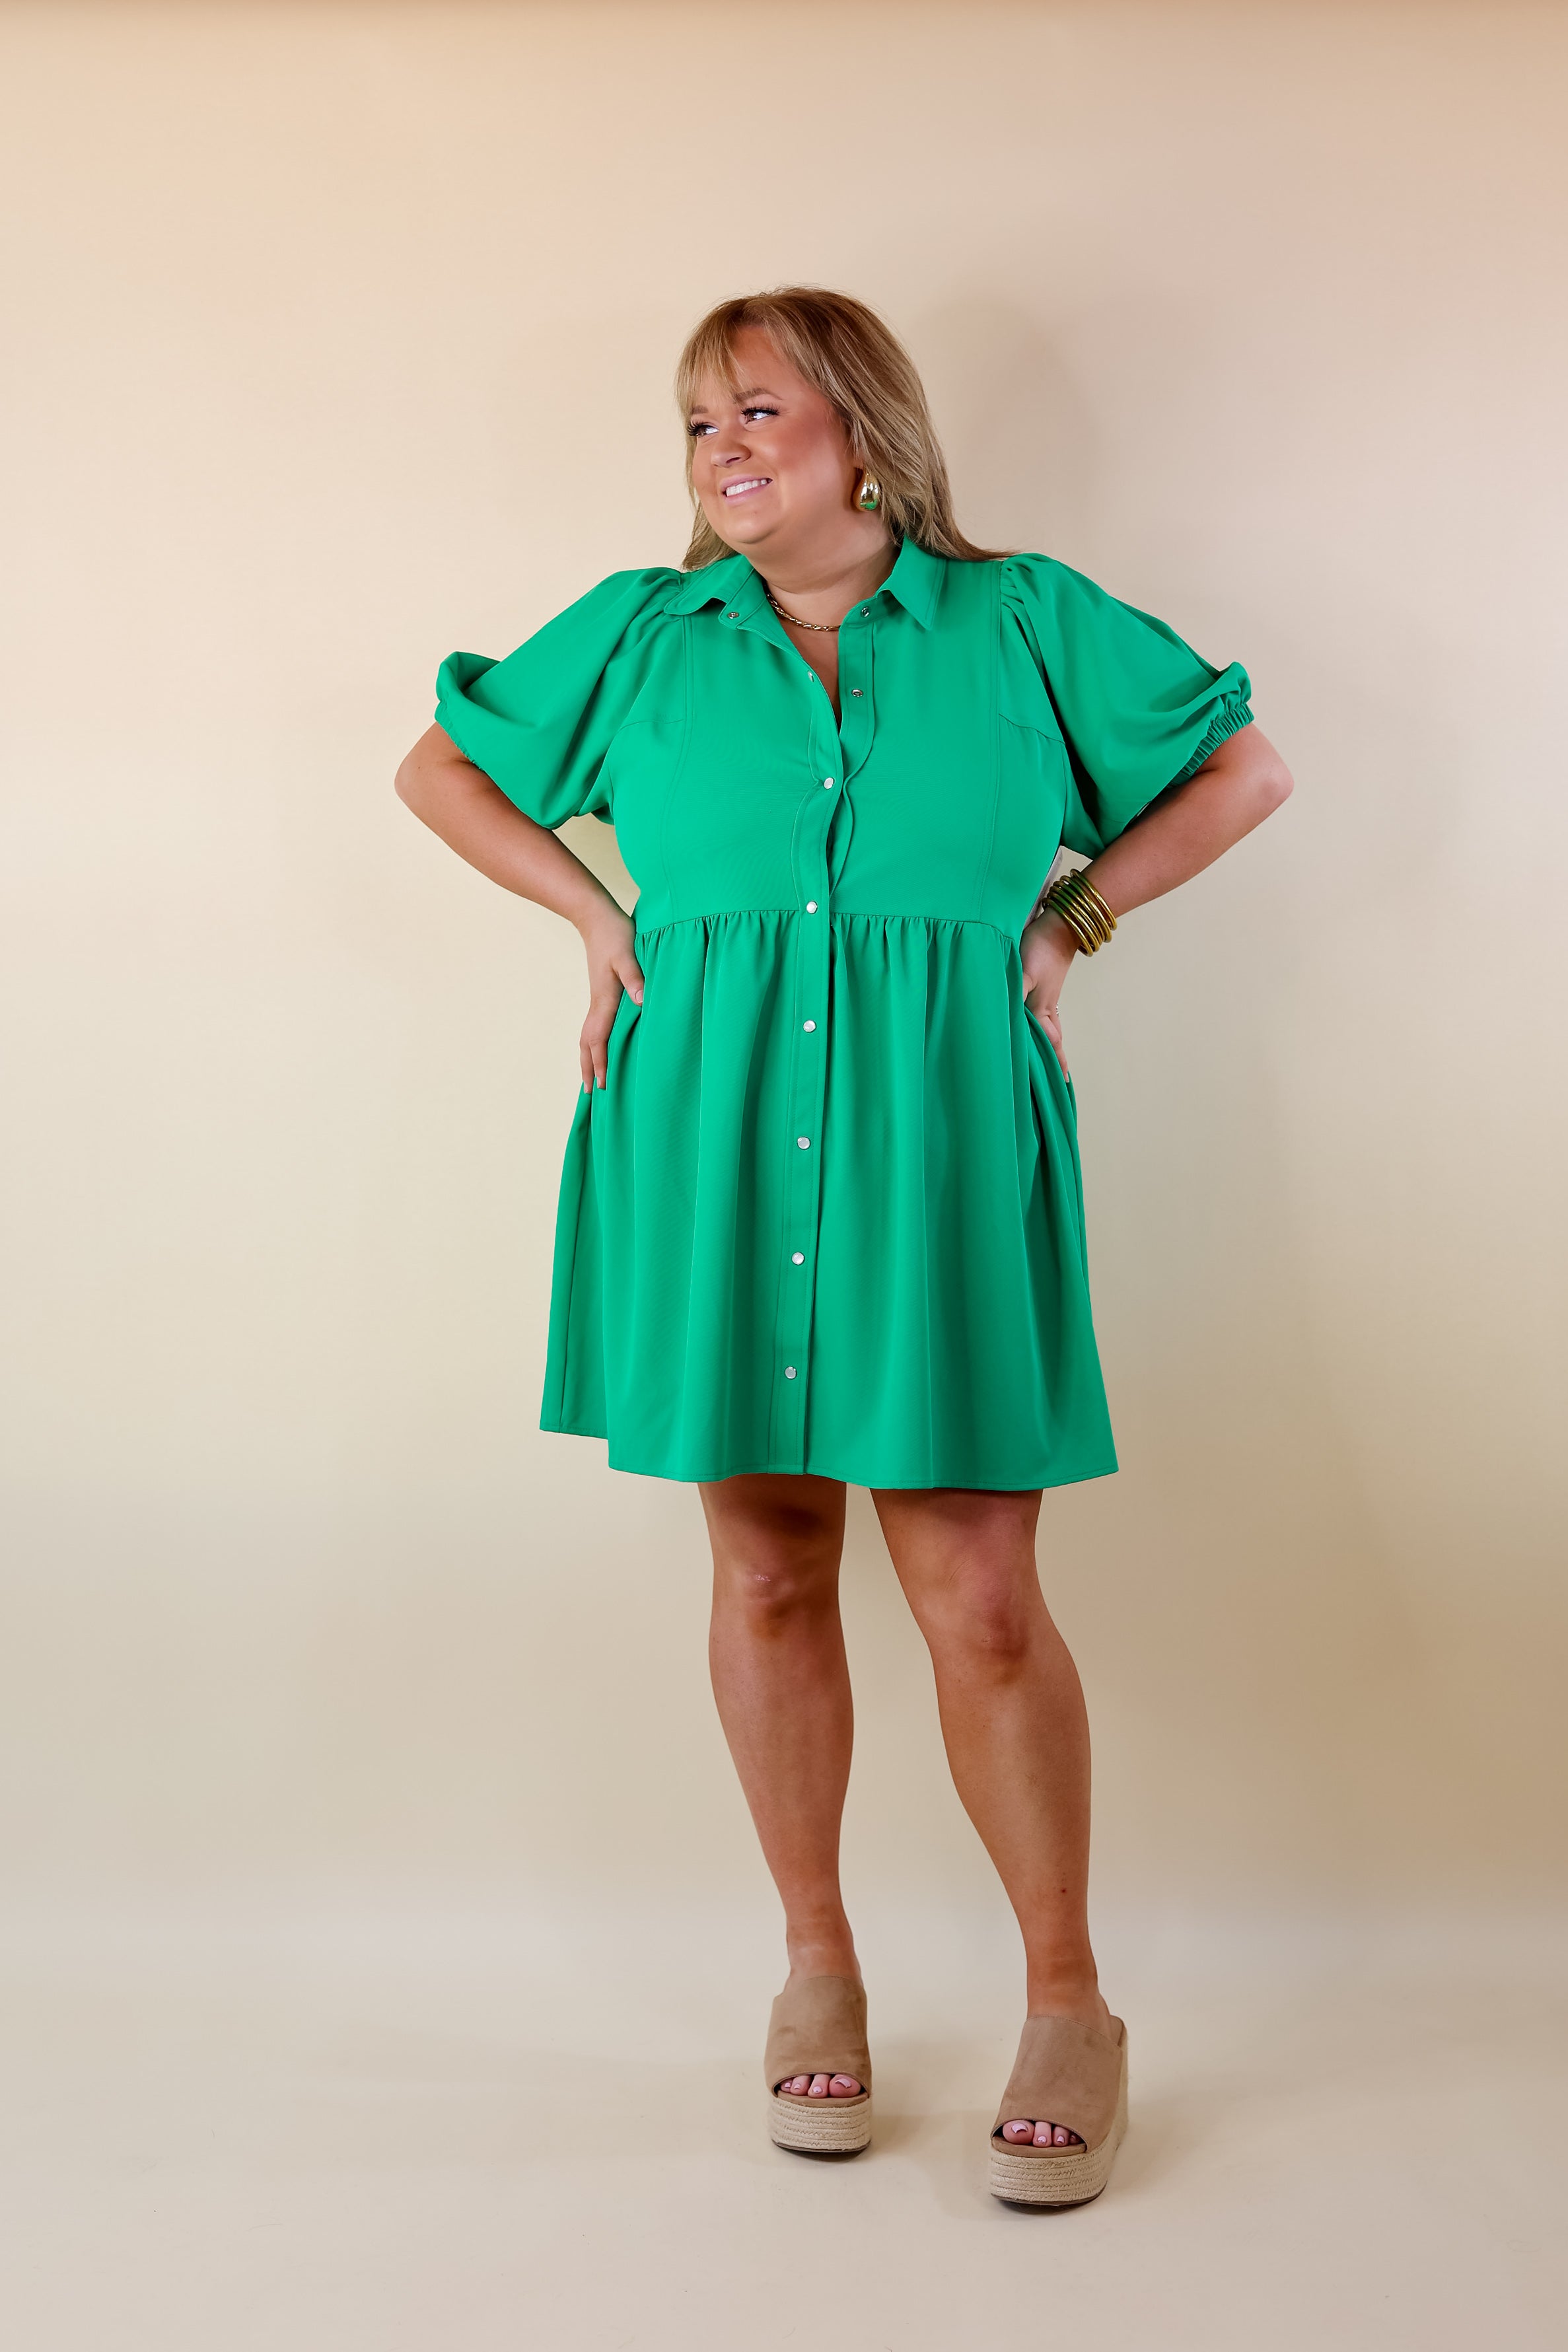 Adventures Ahead Button Up Babydoll Dress in Green - Giddy Up Glamour Boutique